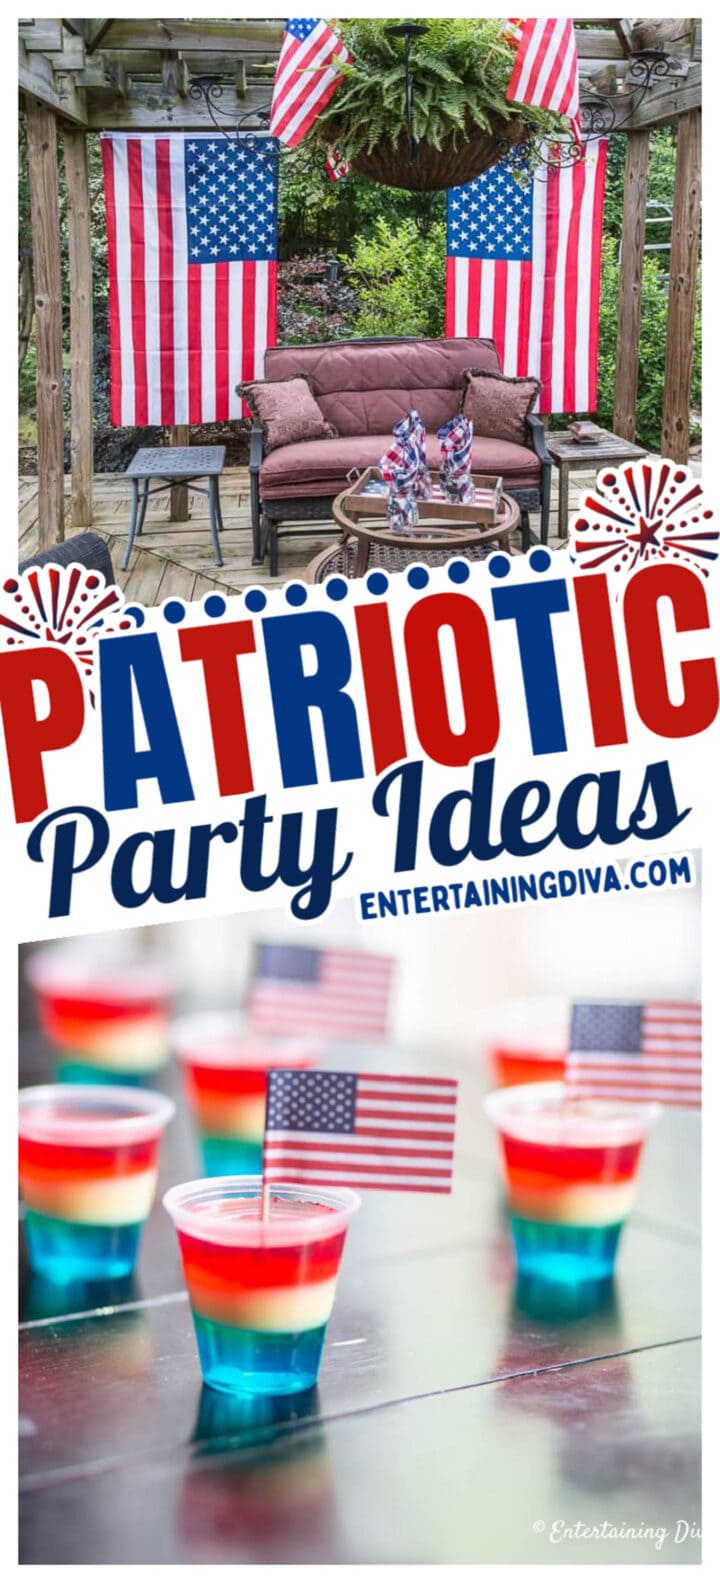 Easy and Elegant 4th of July Party Ideas